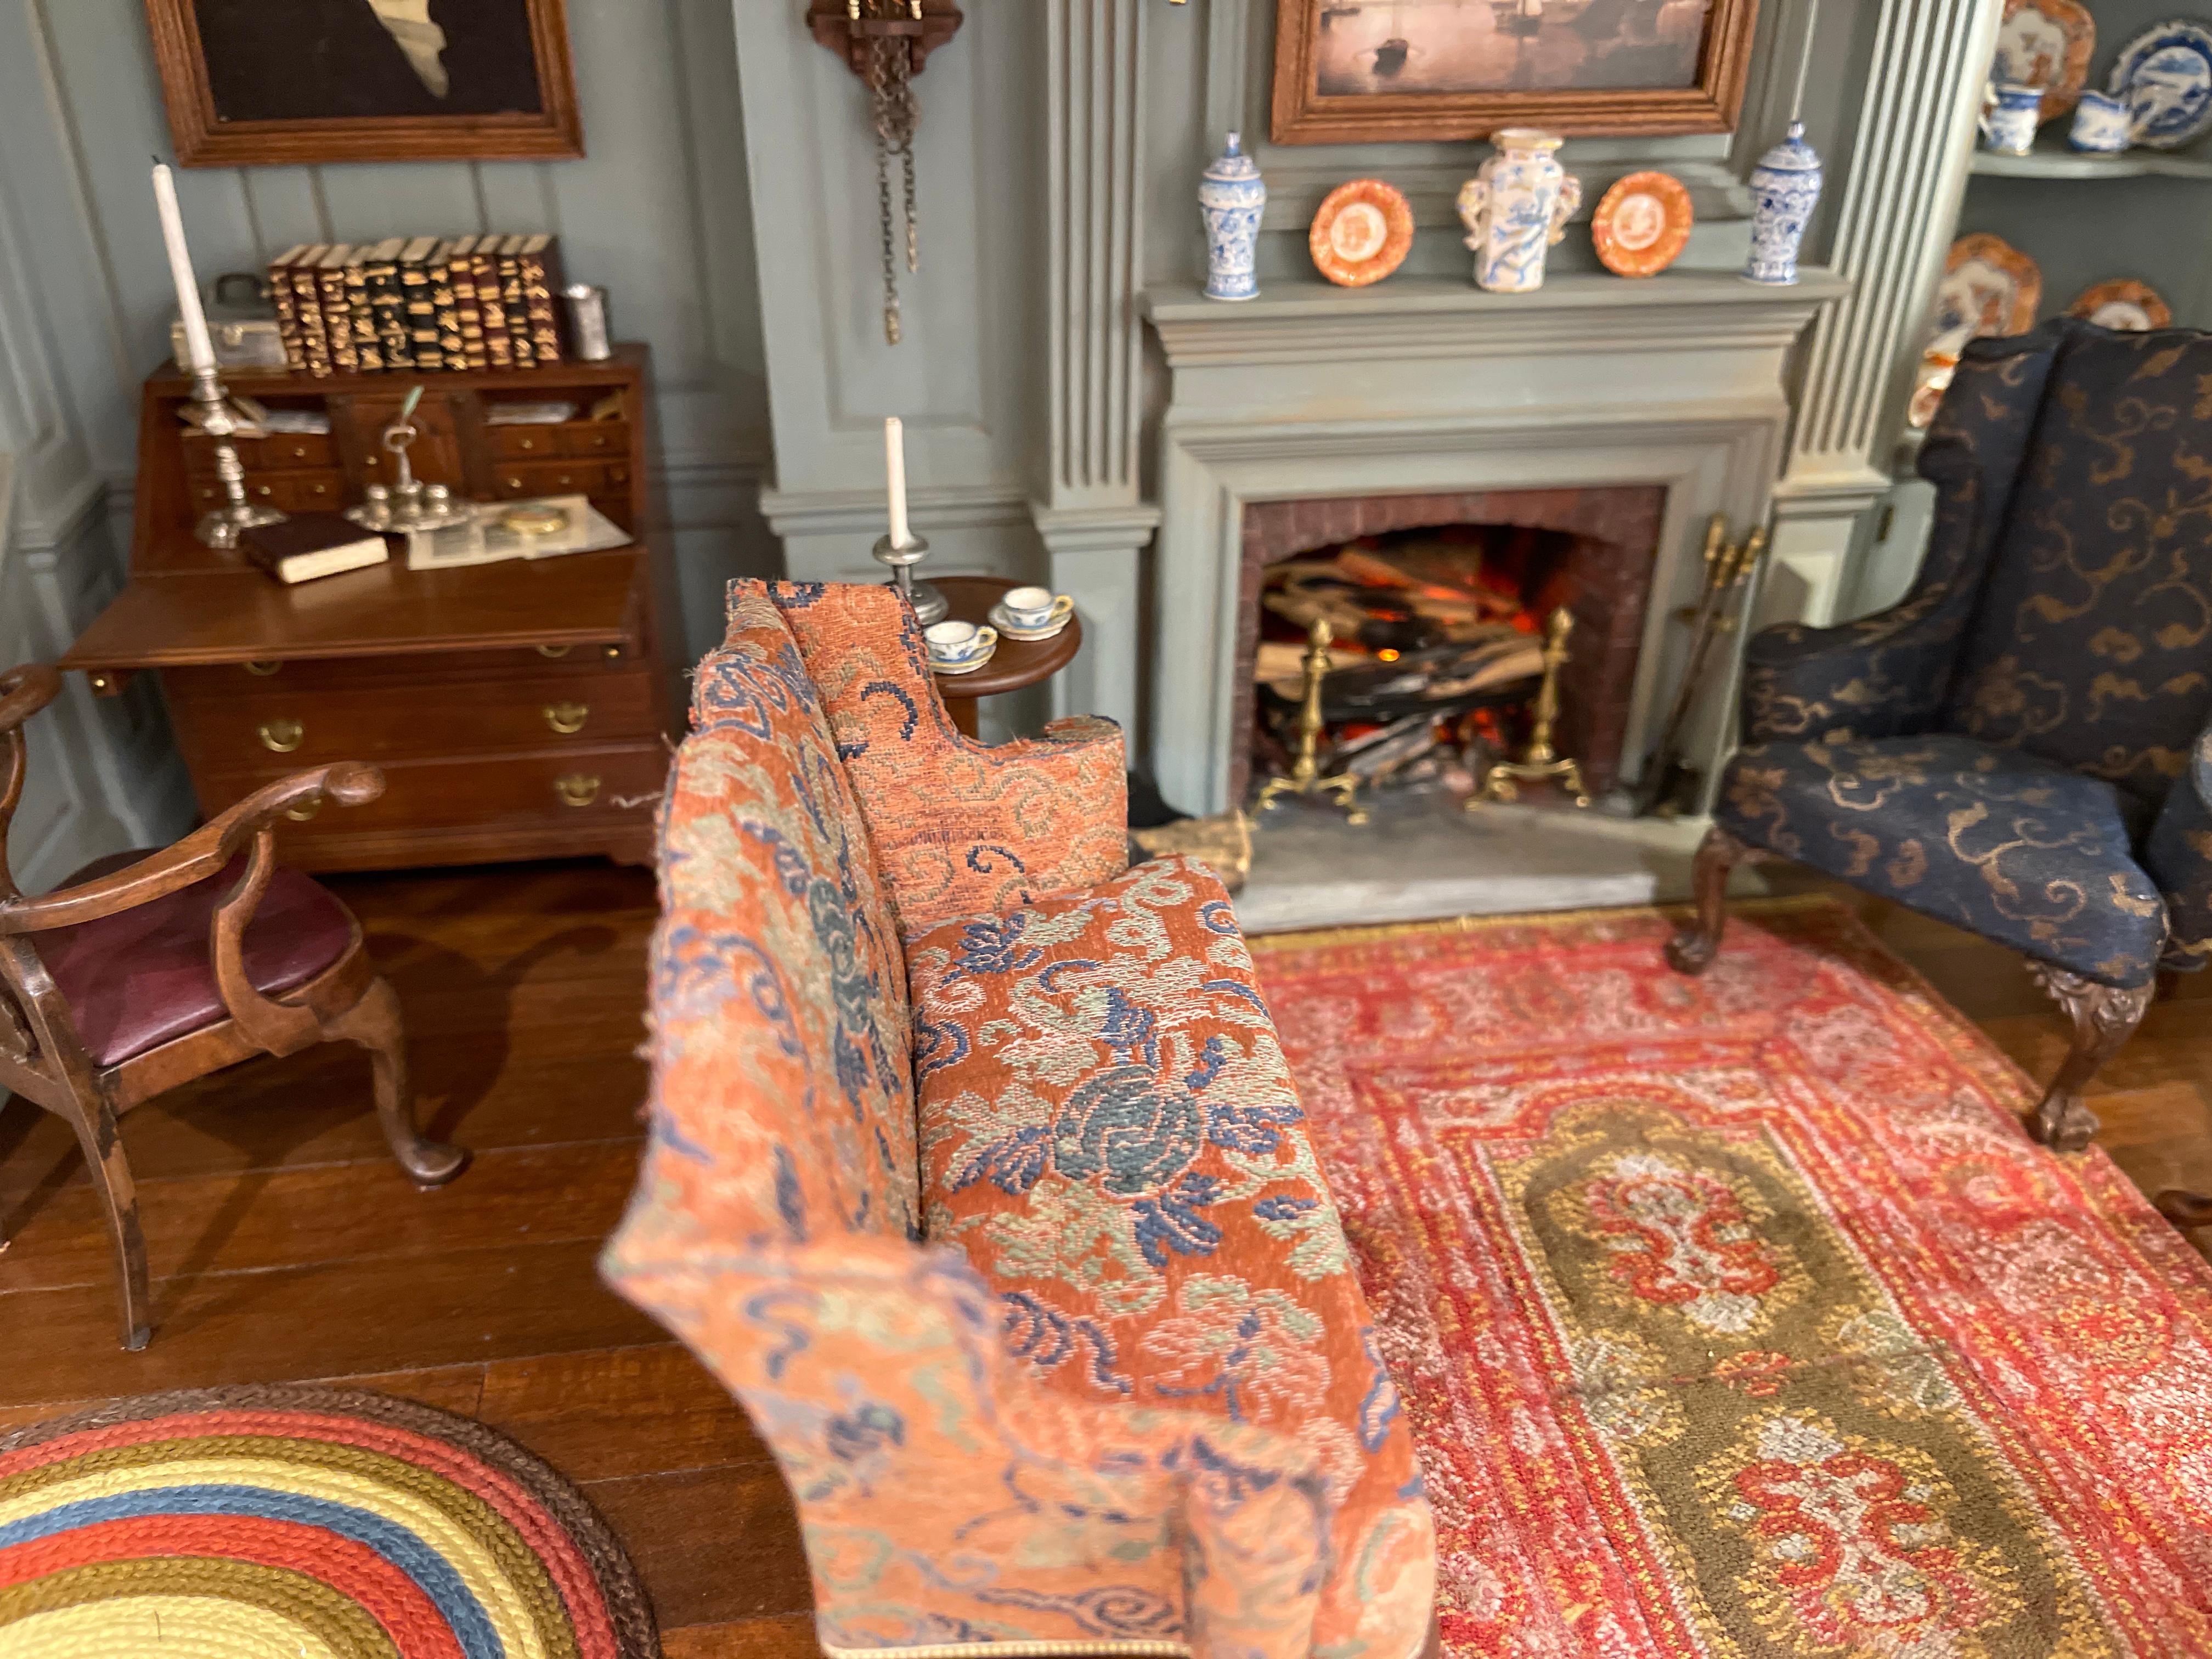 Late Colonial Sitting Room, Boston MA, 1760 - Miniature Room by Kupjack Studios For Sale 4